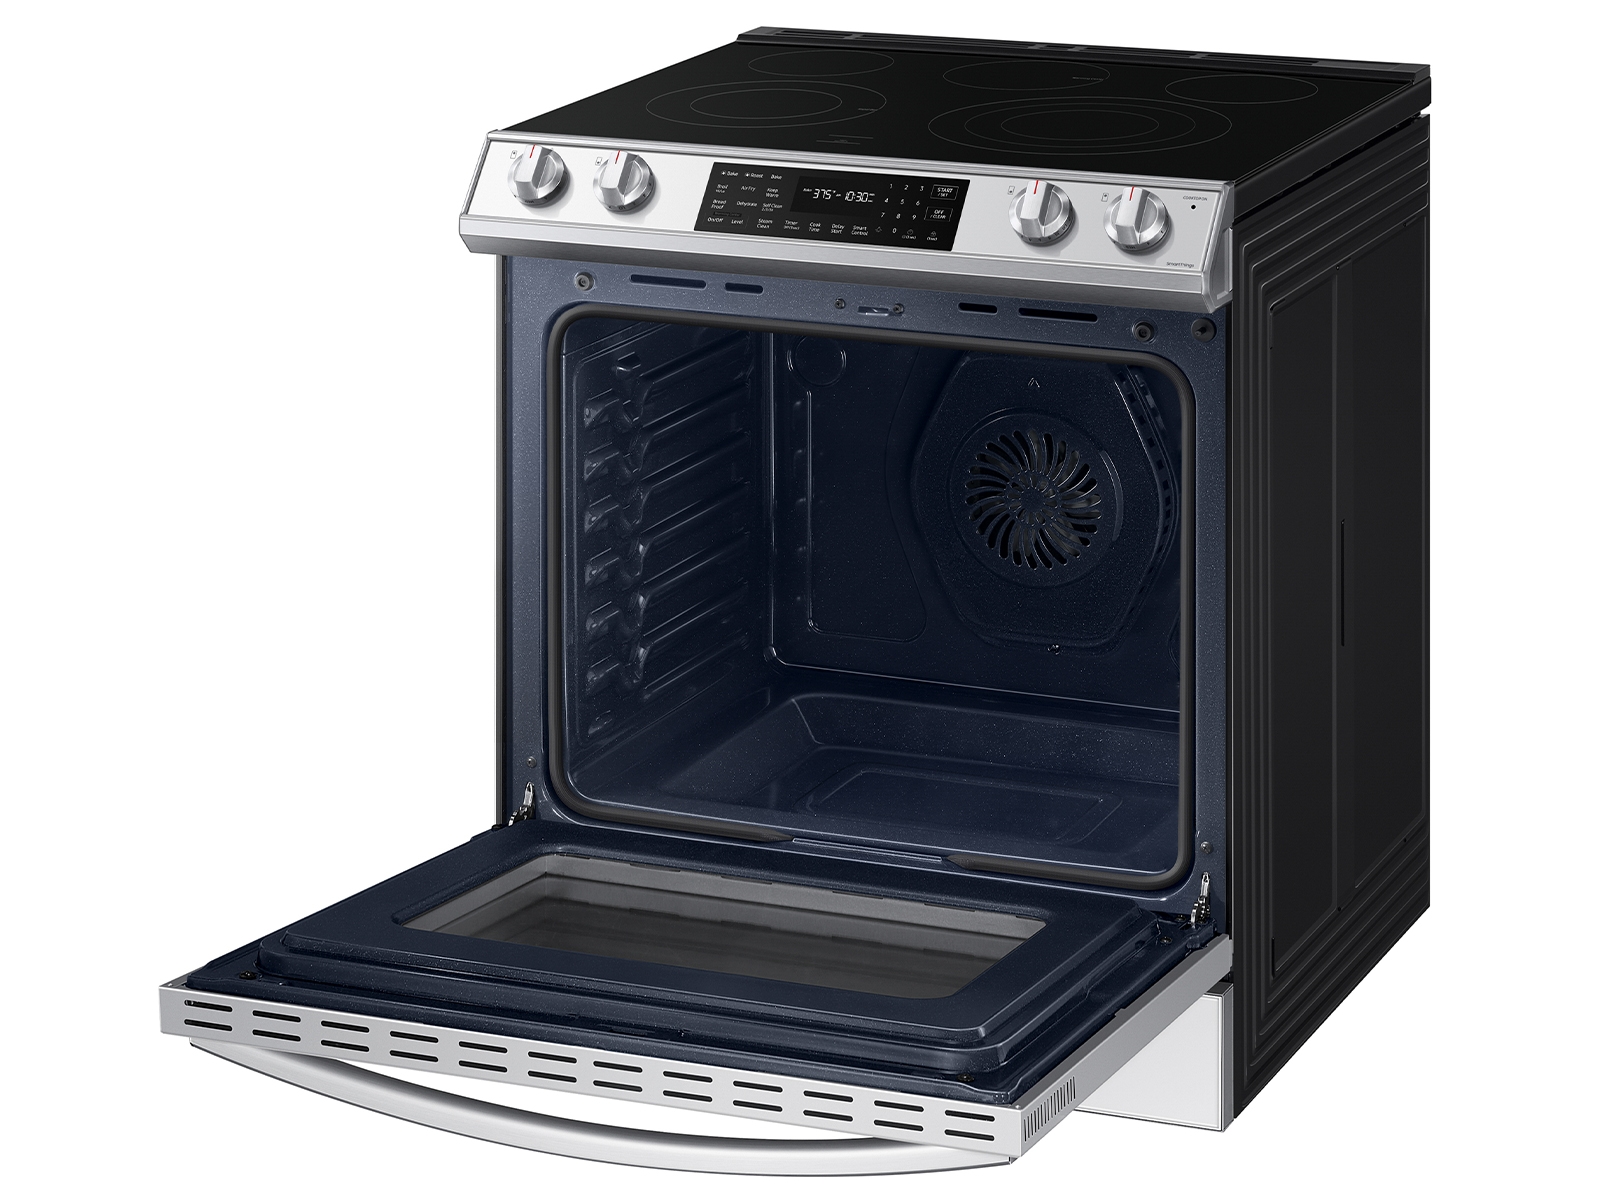 Thumbnail image of Bespoke 6.3 cu. ft. Smart Front Control Slide-In Electric Range with Air Fry &amp; Wi-Fi in White Glass